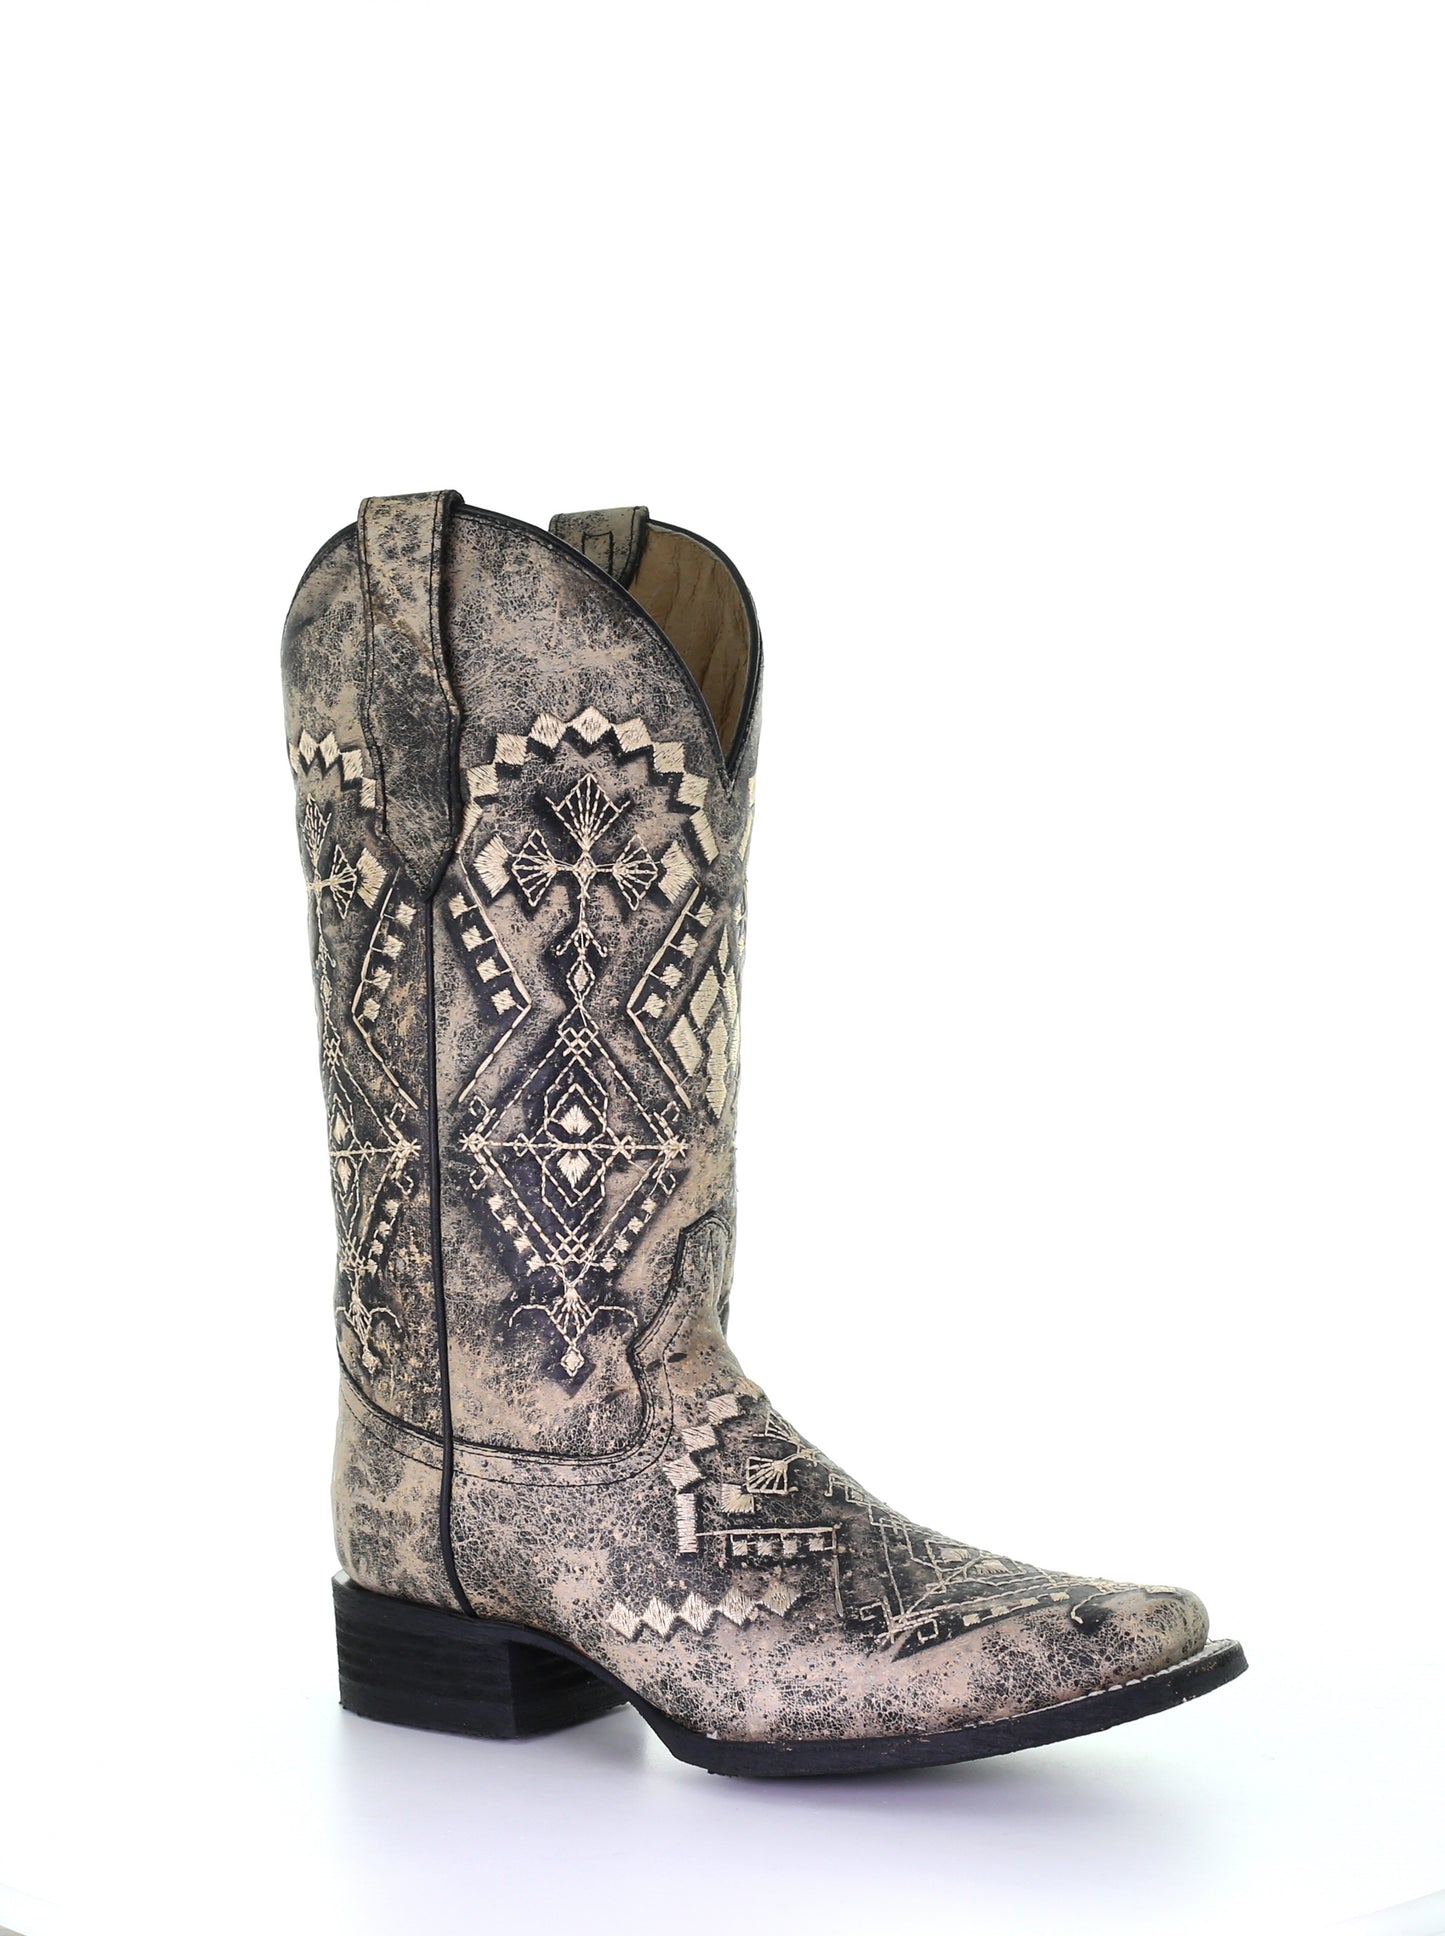 L5525 Circle G by Corral Boots Women's SAND Embroidery Square Toe